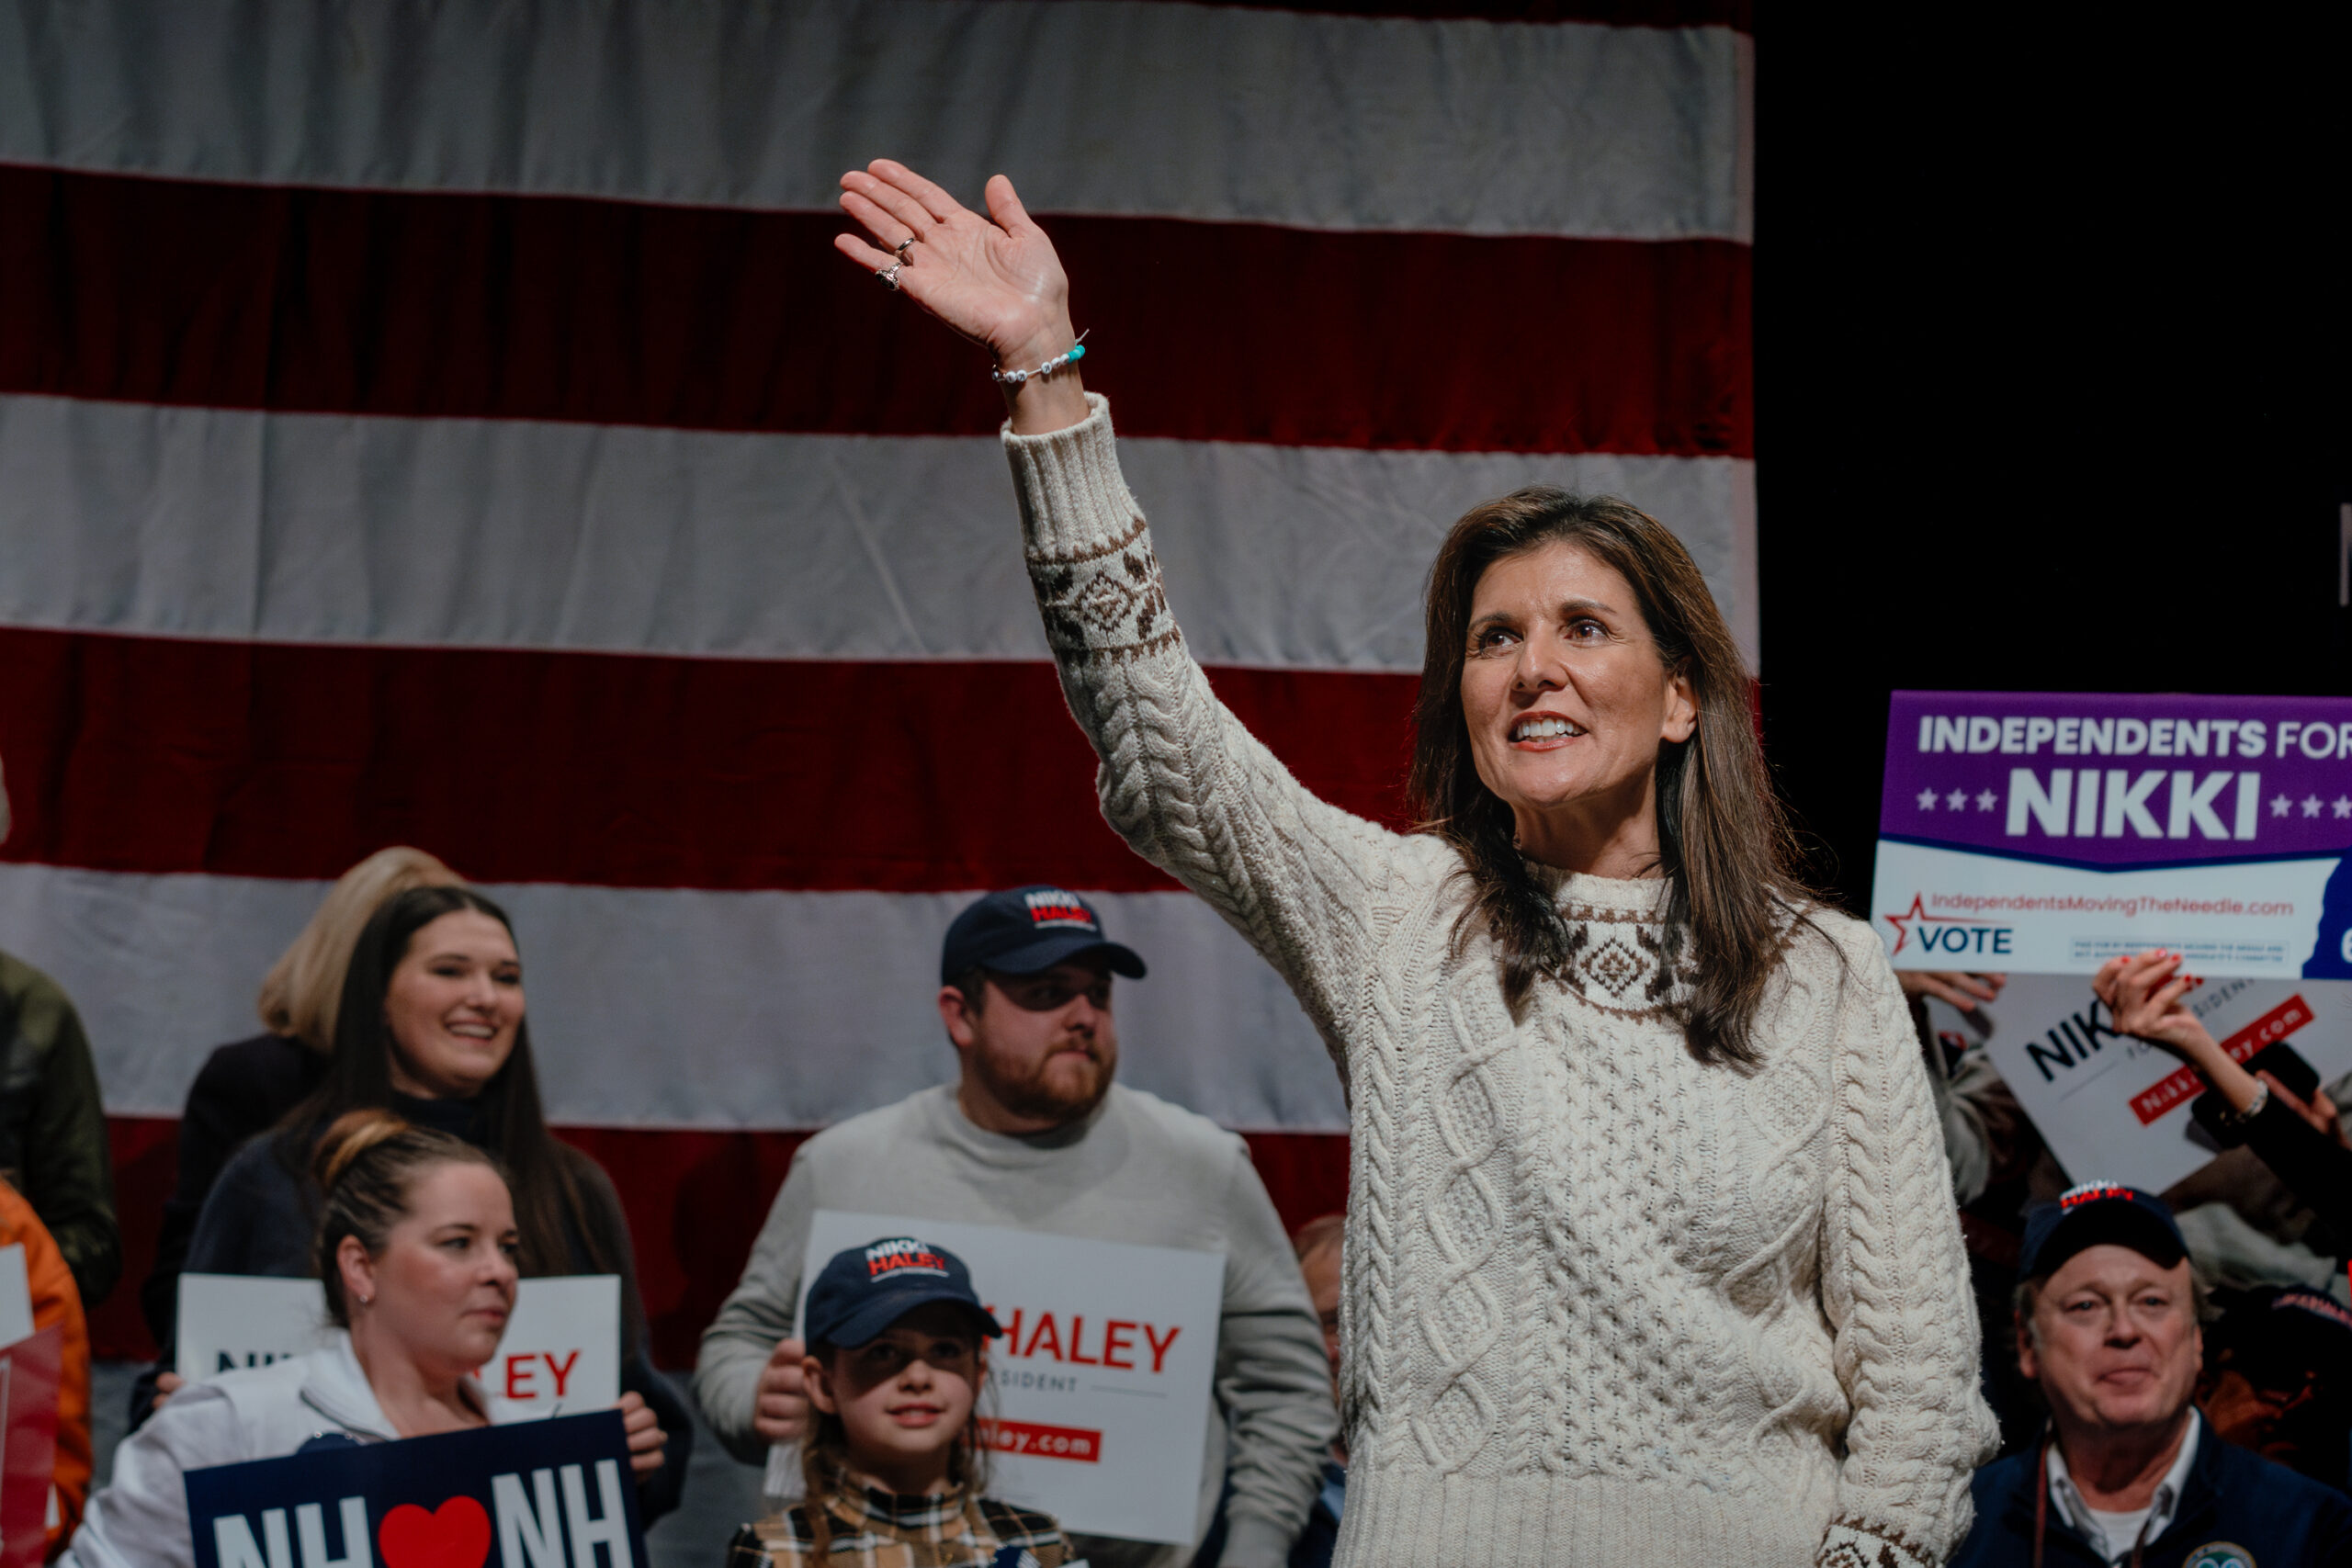 Nikki Haley finally got Trump one-on-one. There’s a reason she’s still losing.